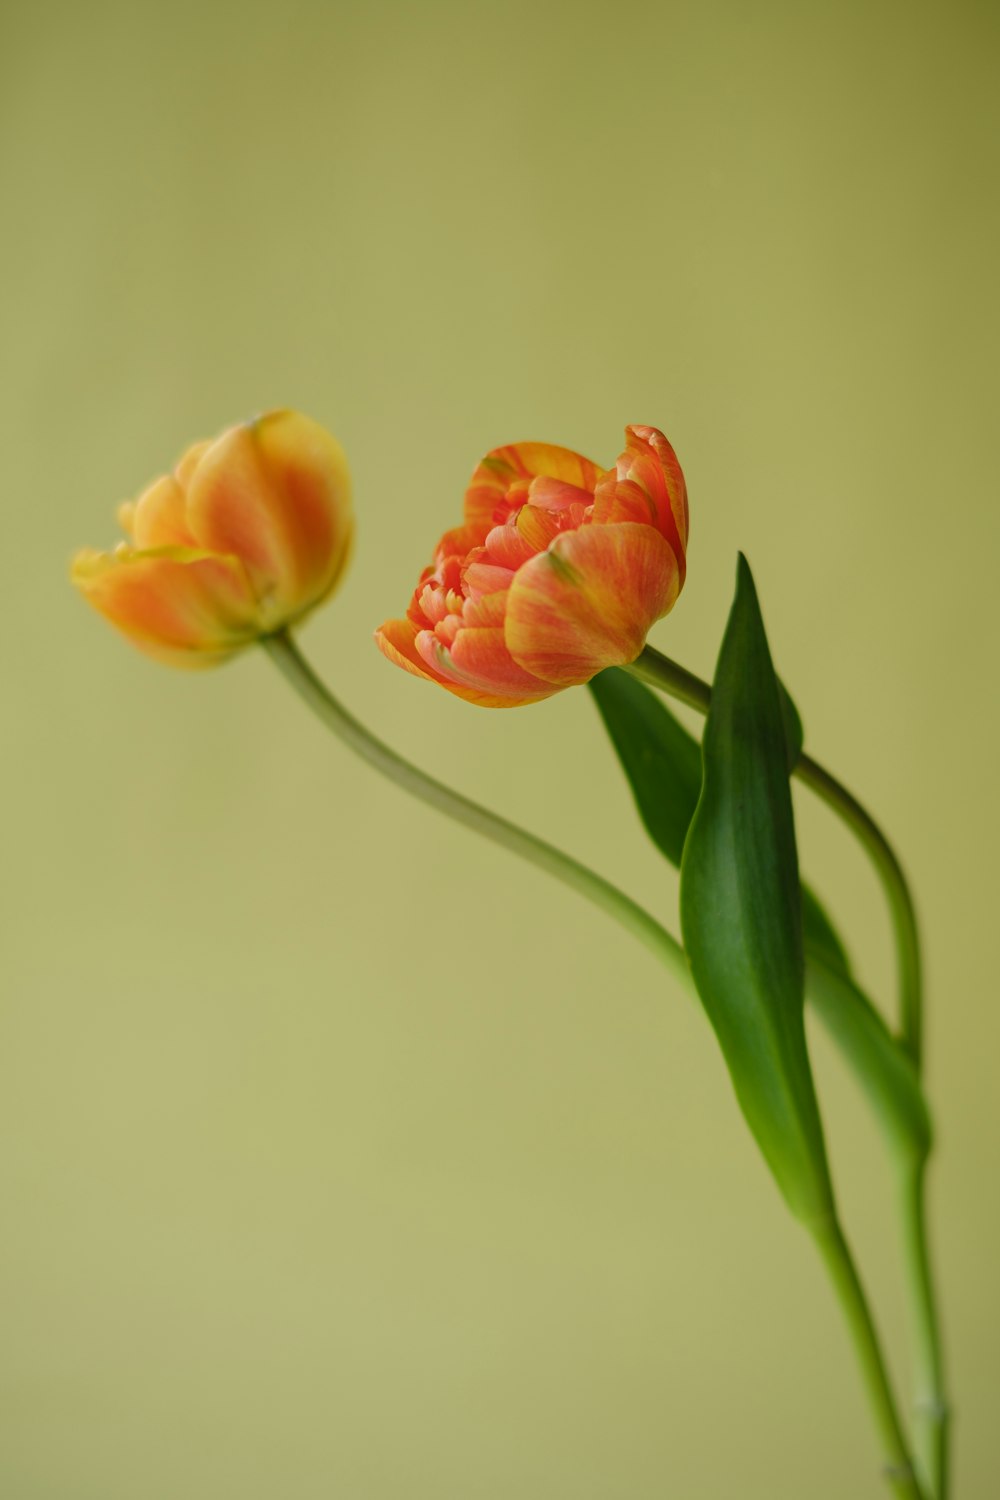 two orange tulips with green stems in a vase